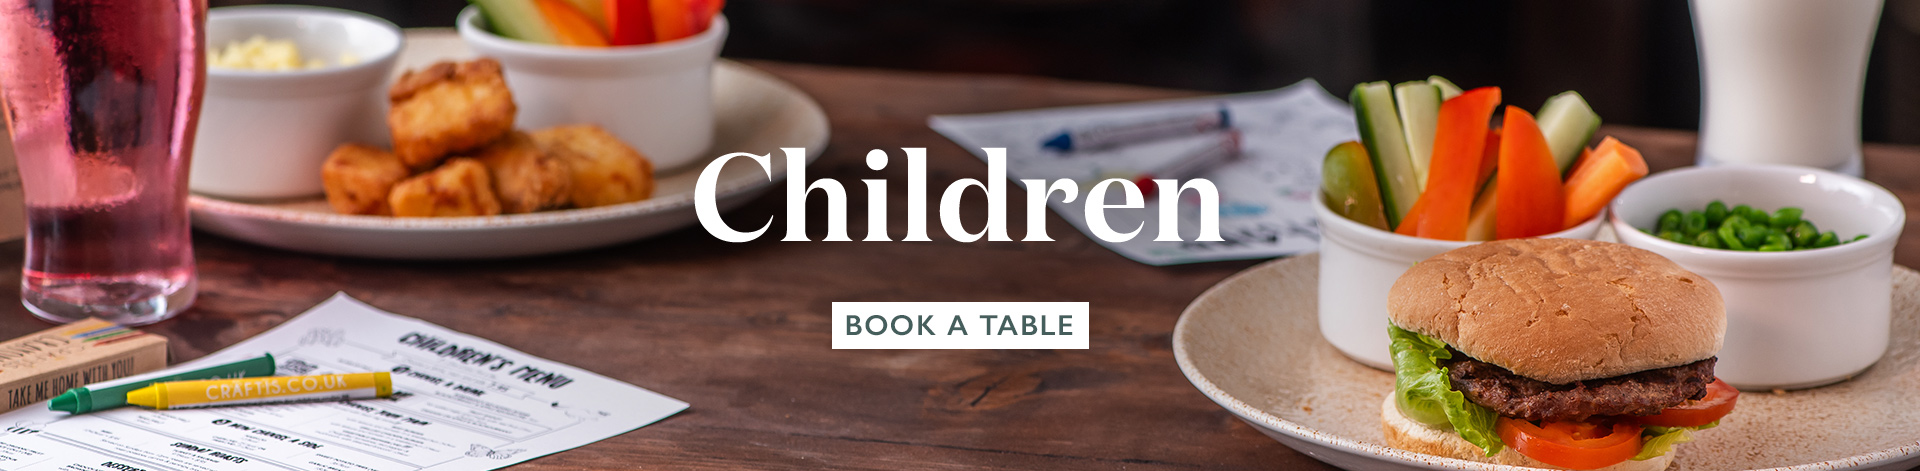 Children's Menu at The Shy Horse